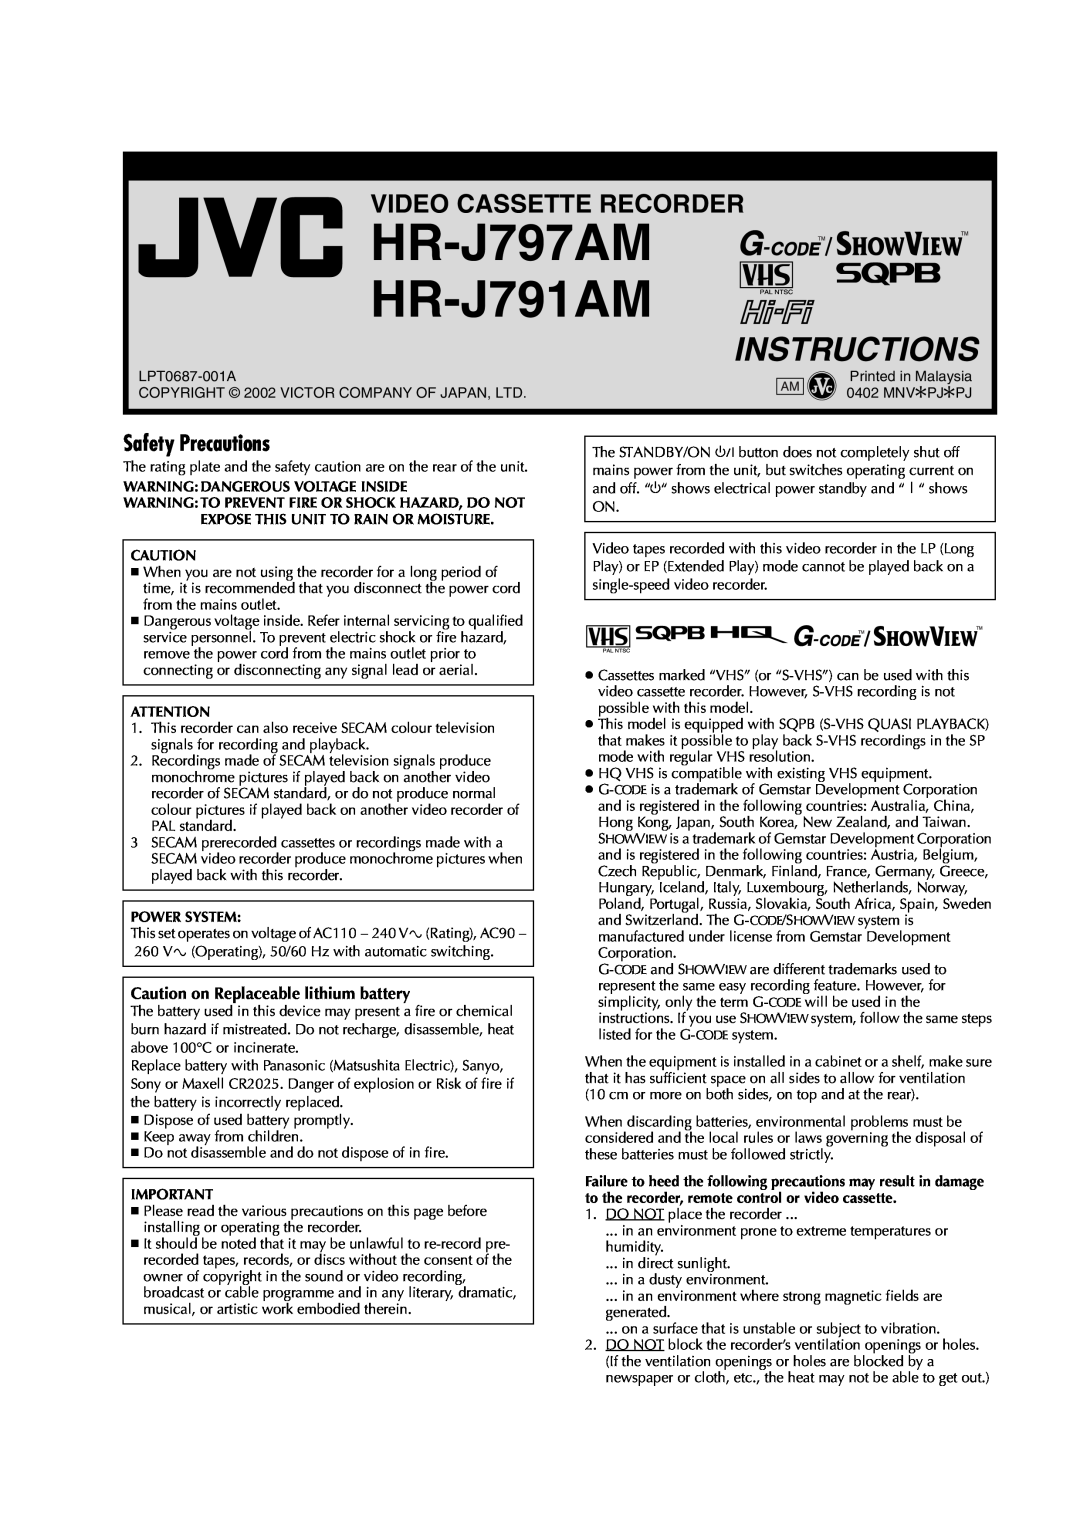 JVC HR-J797AM manual Safety Precautions, Caution on Replaceable lithium battery, Warning Dangerous Voltage Inside 